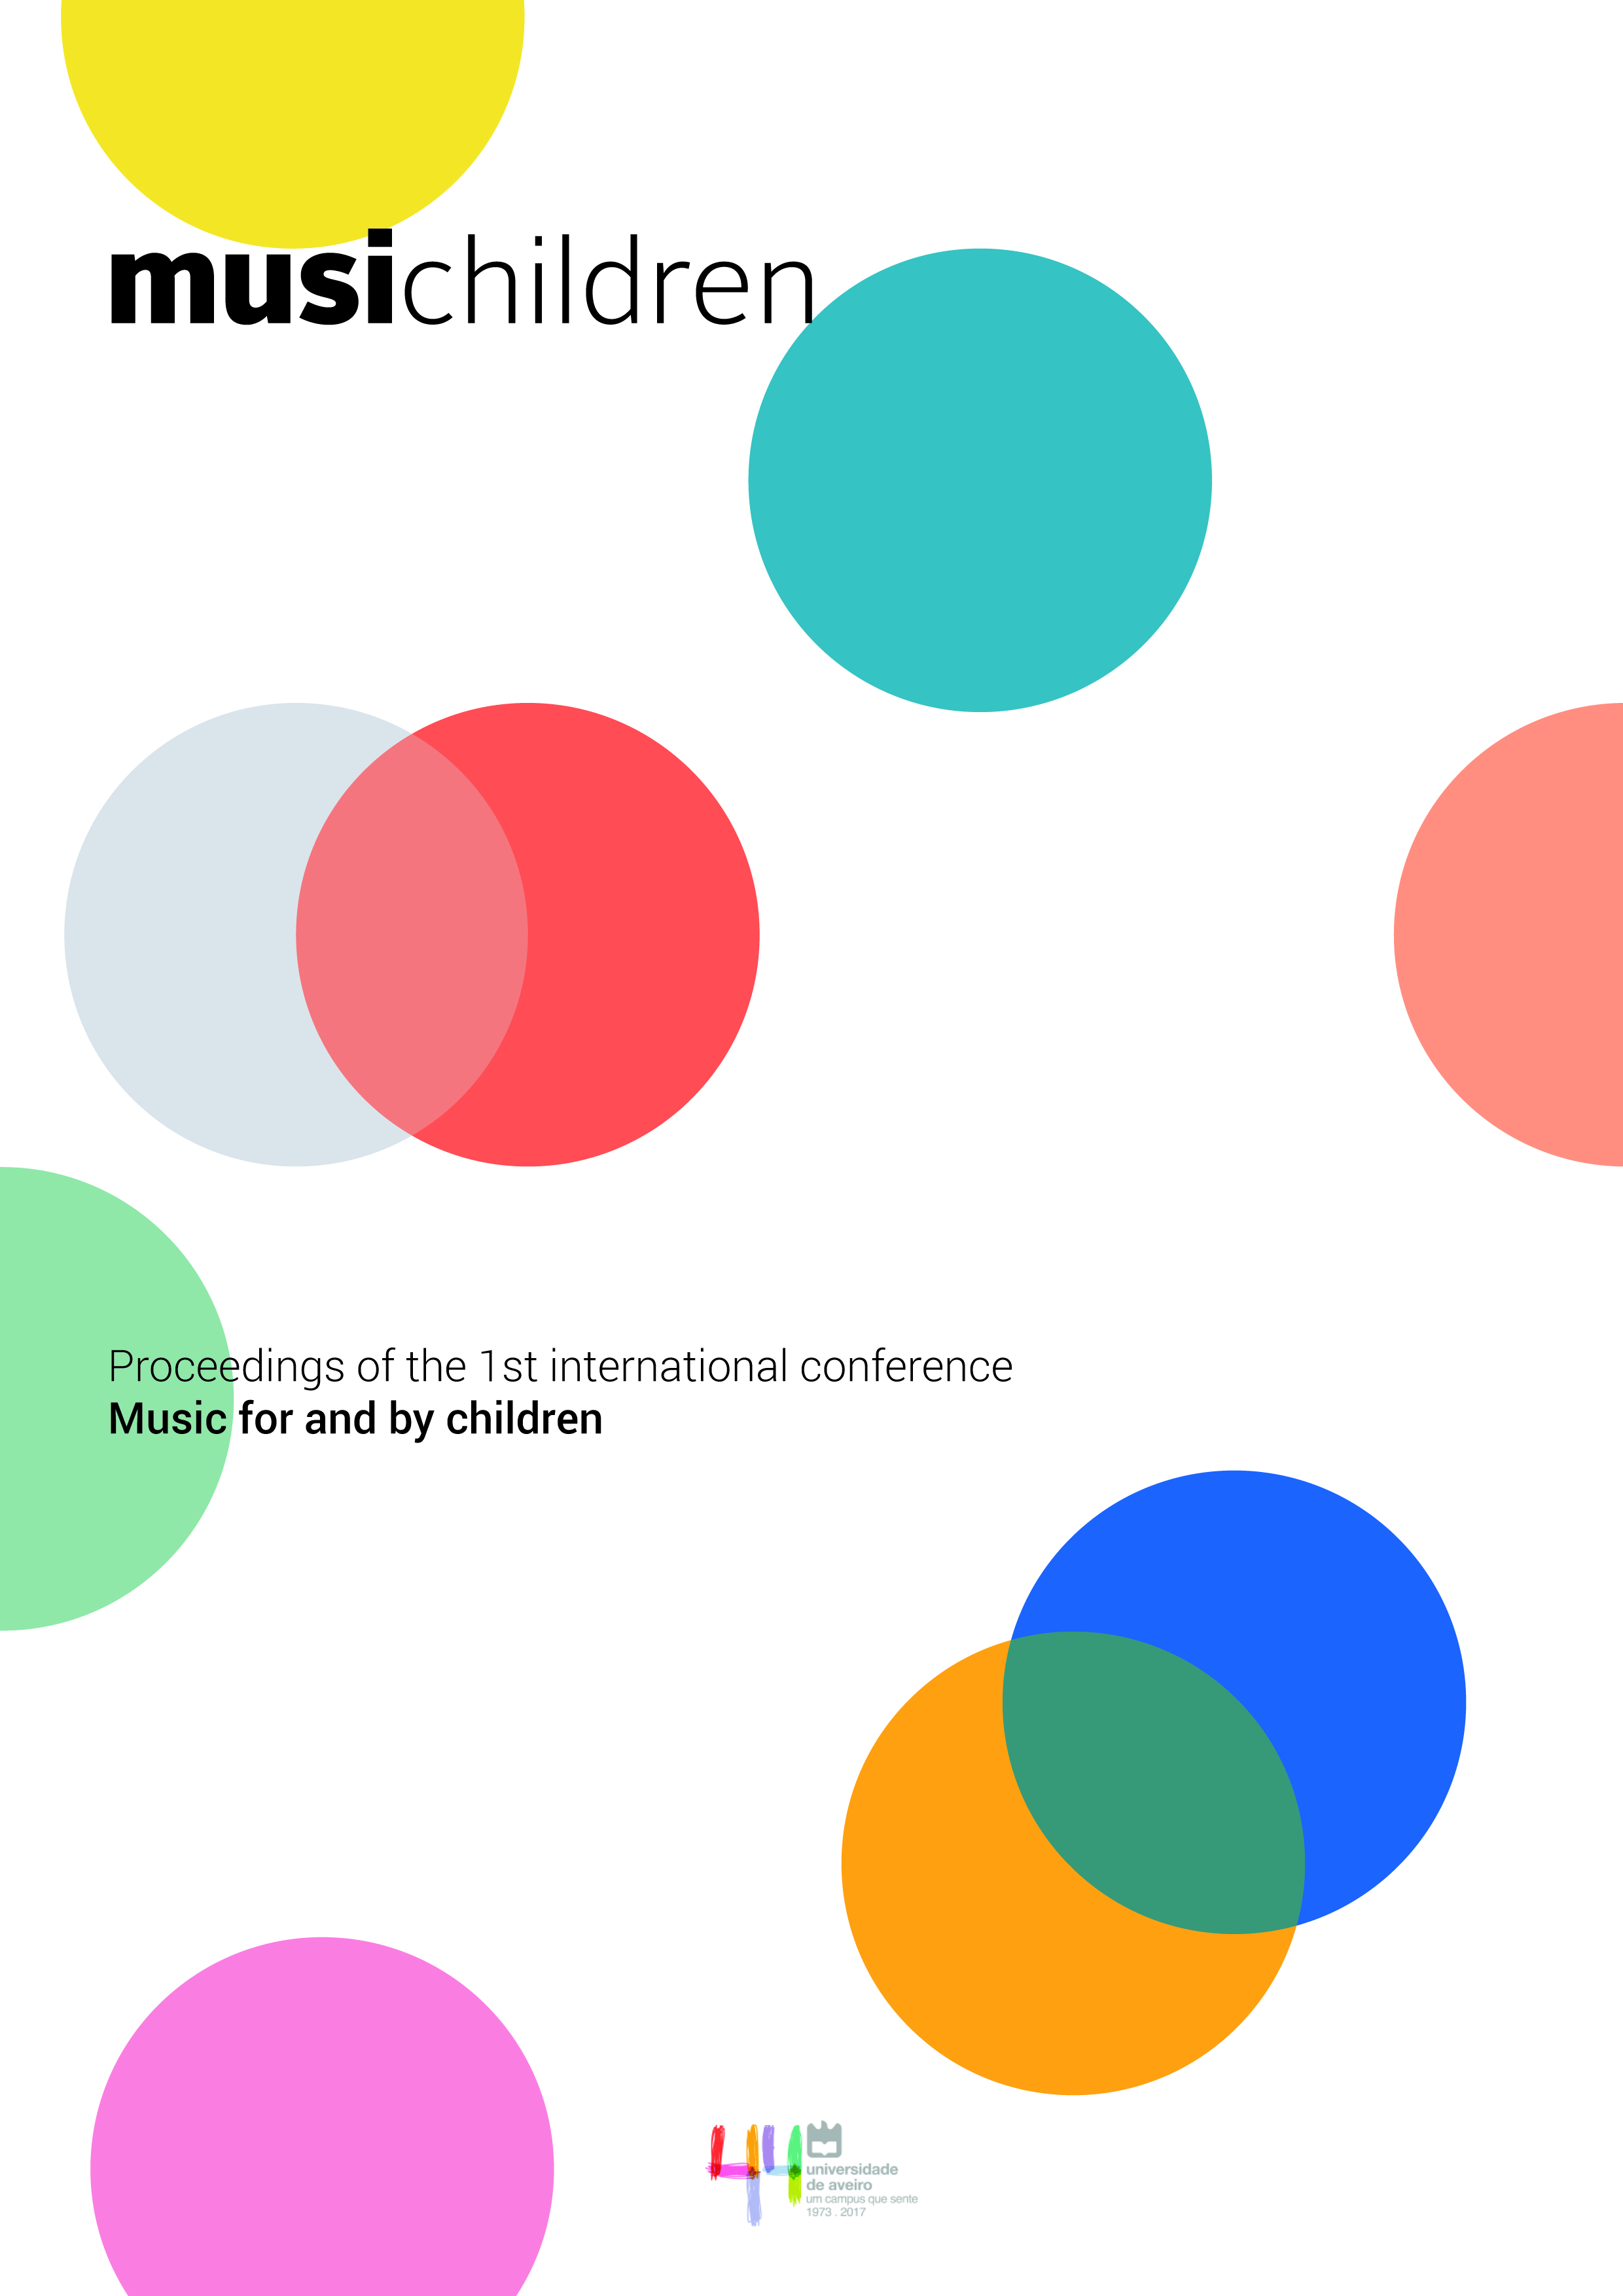 Capa da Musichildren: Proceedings of the 1st International Conference Music for and by Children